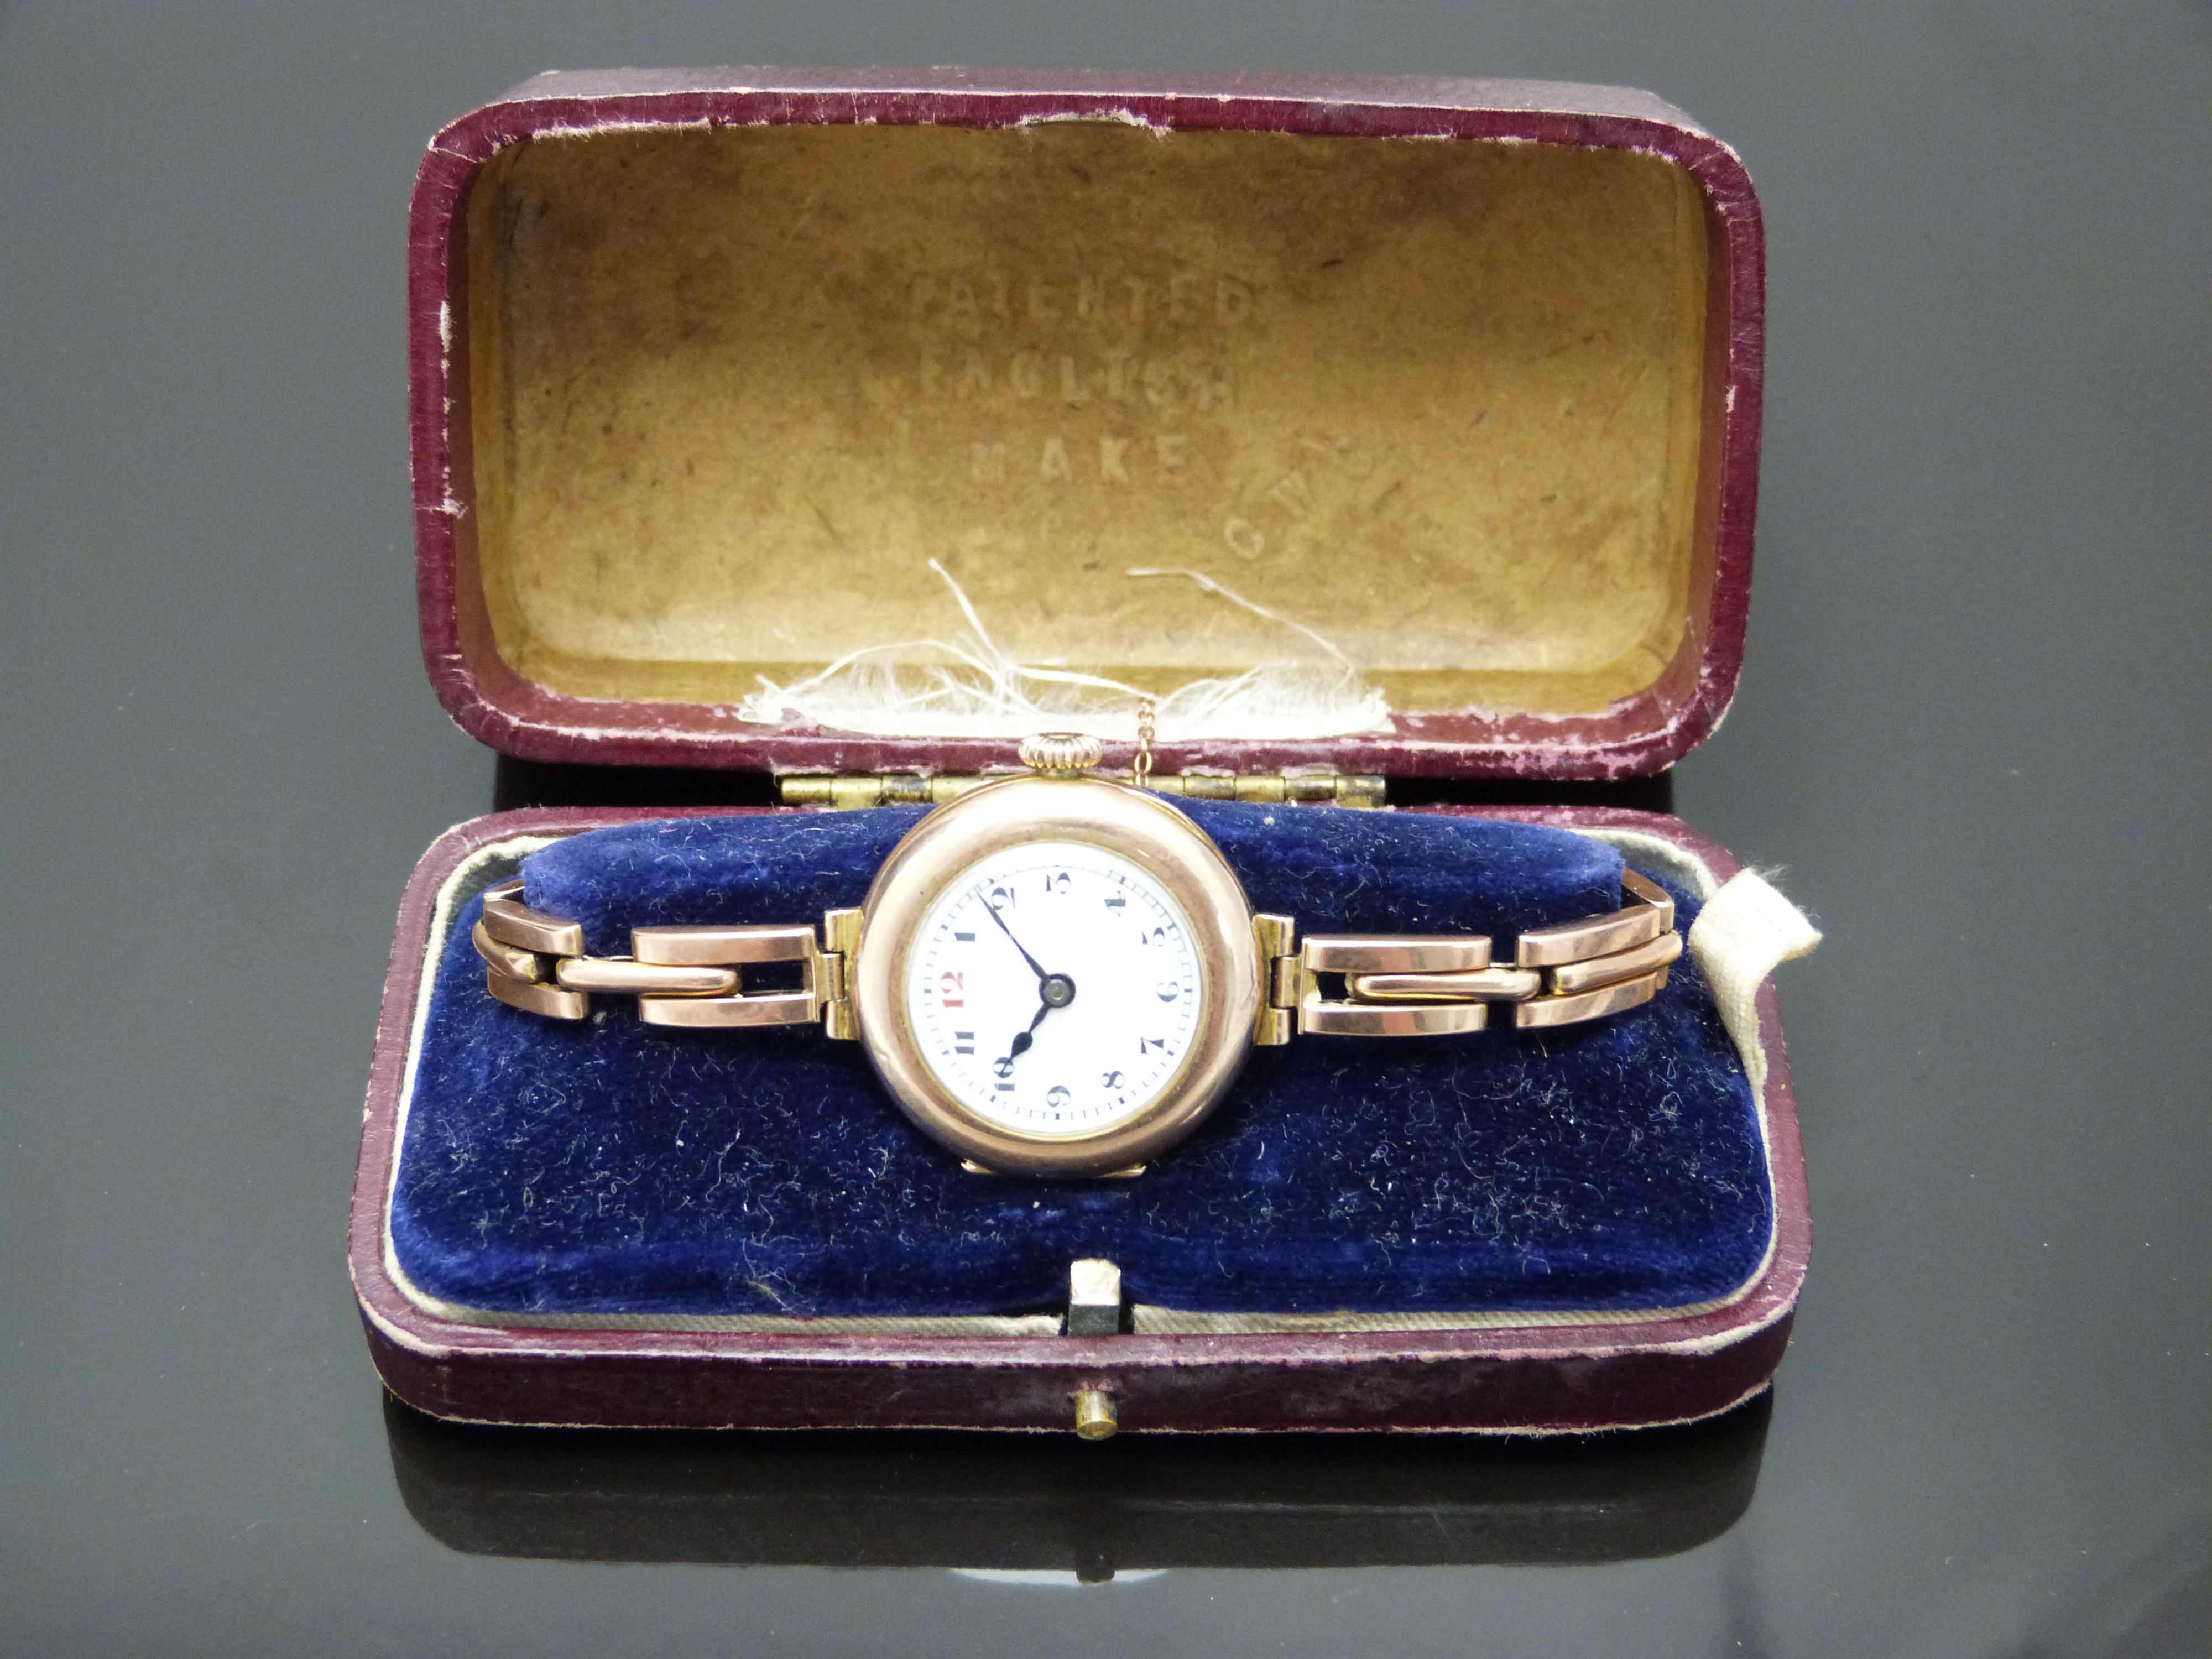 Edwardian 9ct gold ladies wristwatch with blued hands, black Arabic numerals, railroad minute track, - Image 4 of 4